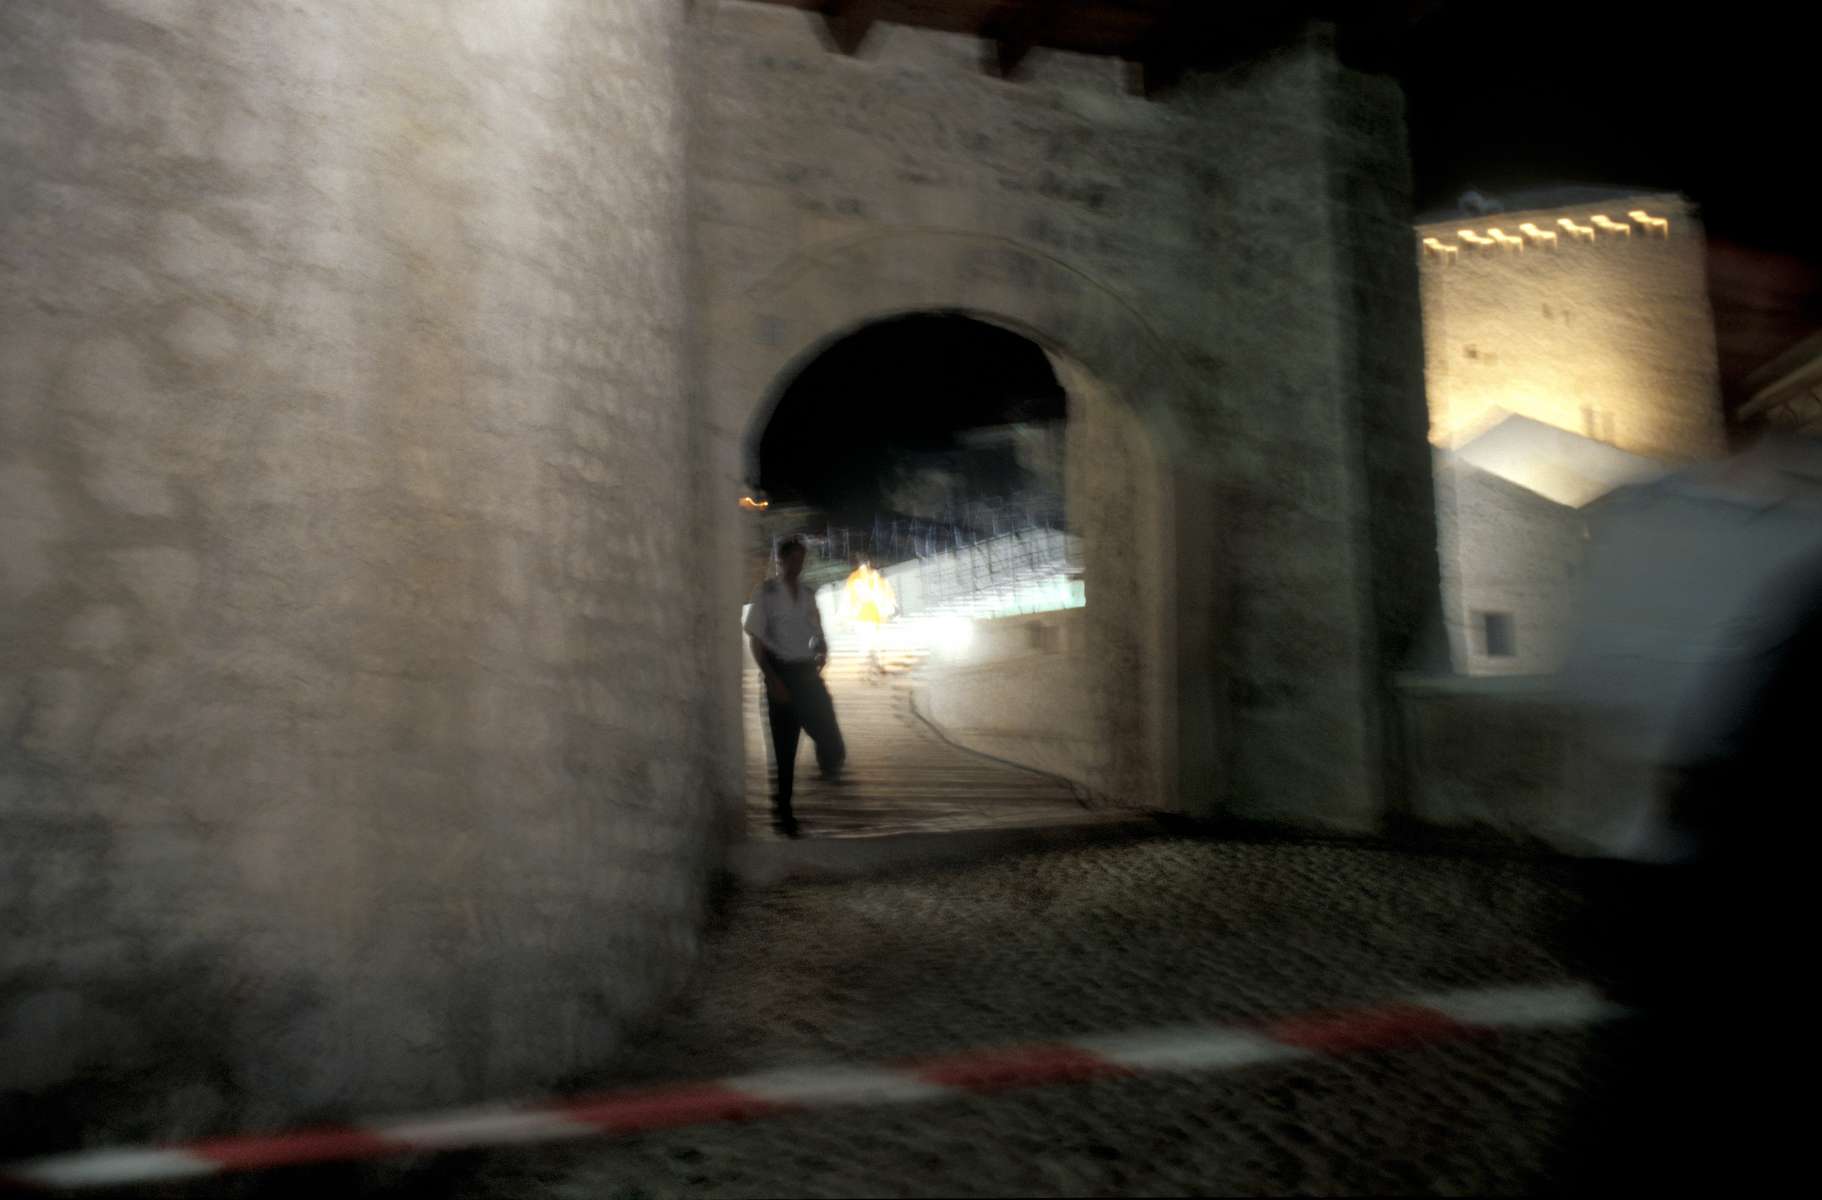 A policeman guards the entrance to the newly rebuilt Mostar Bridge the night before dedication ceremonies and the re-opening of the bridge, which was destroyed by Croat forces during the war.